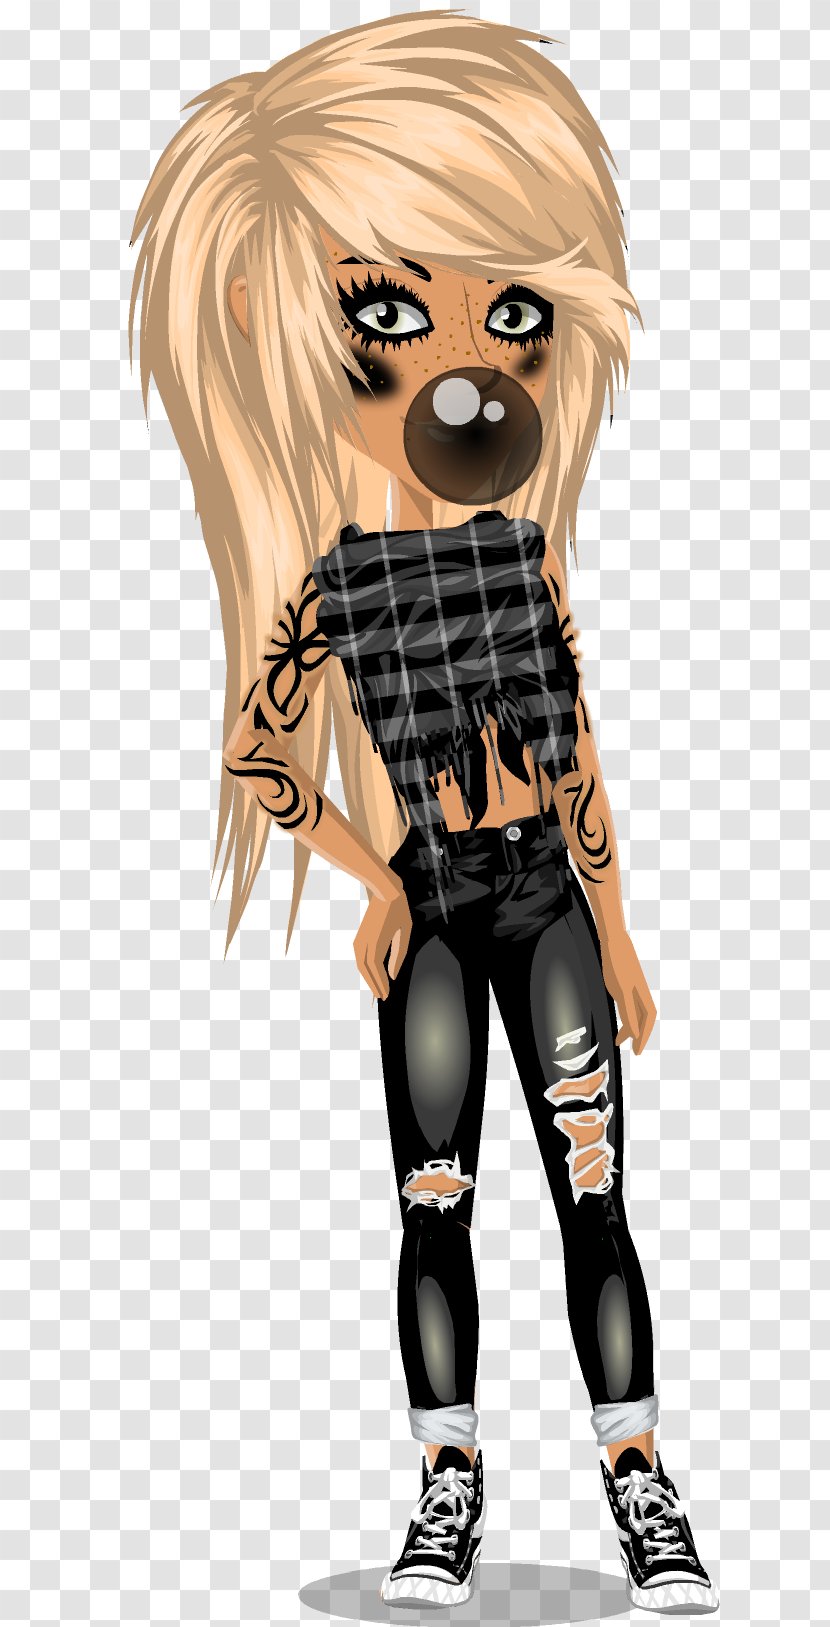 Brown Hair Animated Cartoon Character - Dance Team Transparent PNG